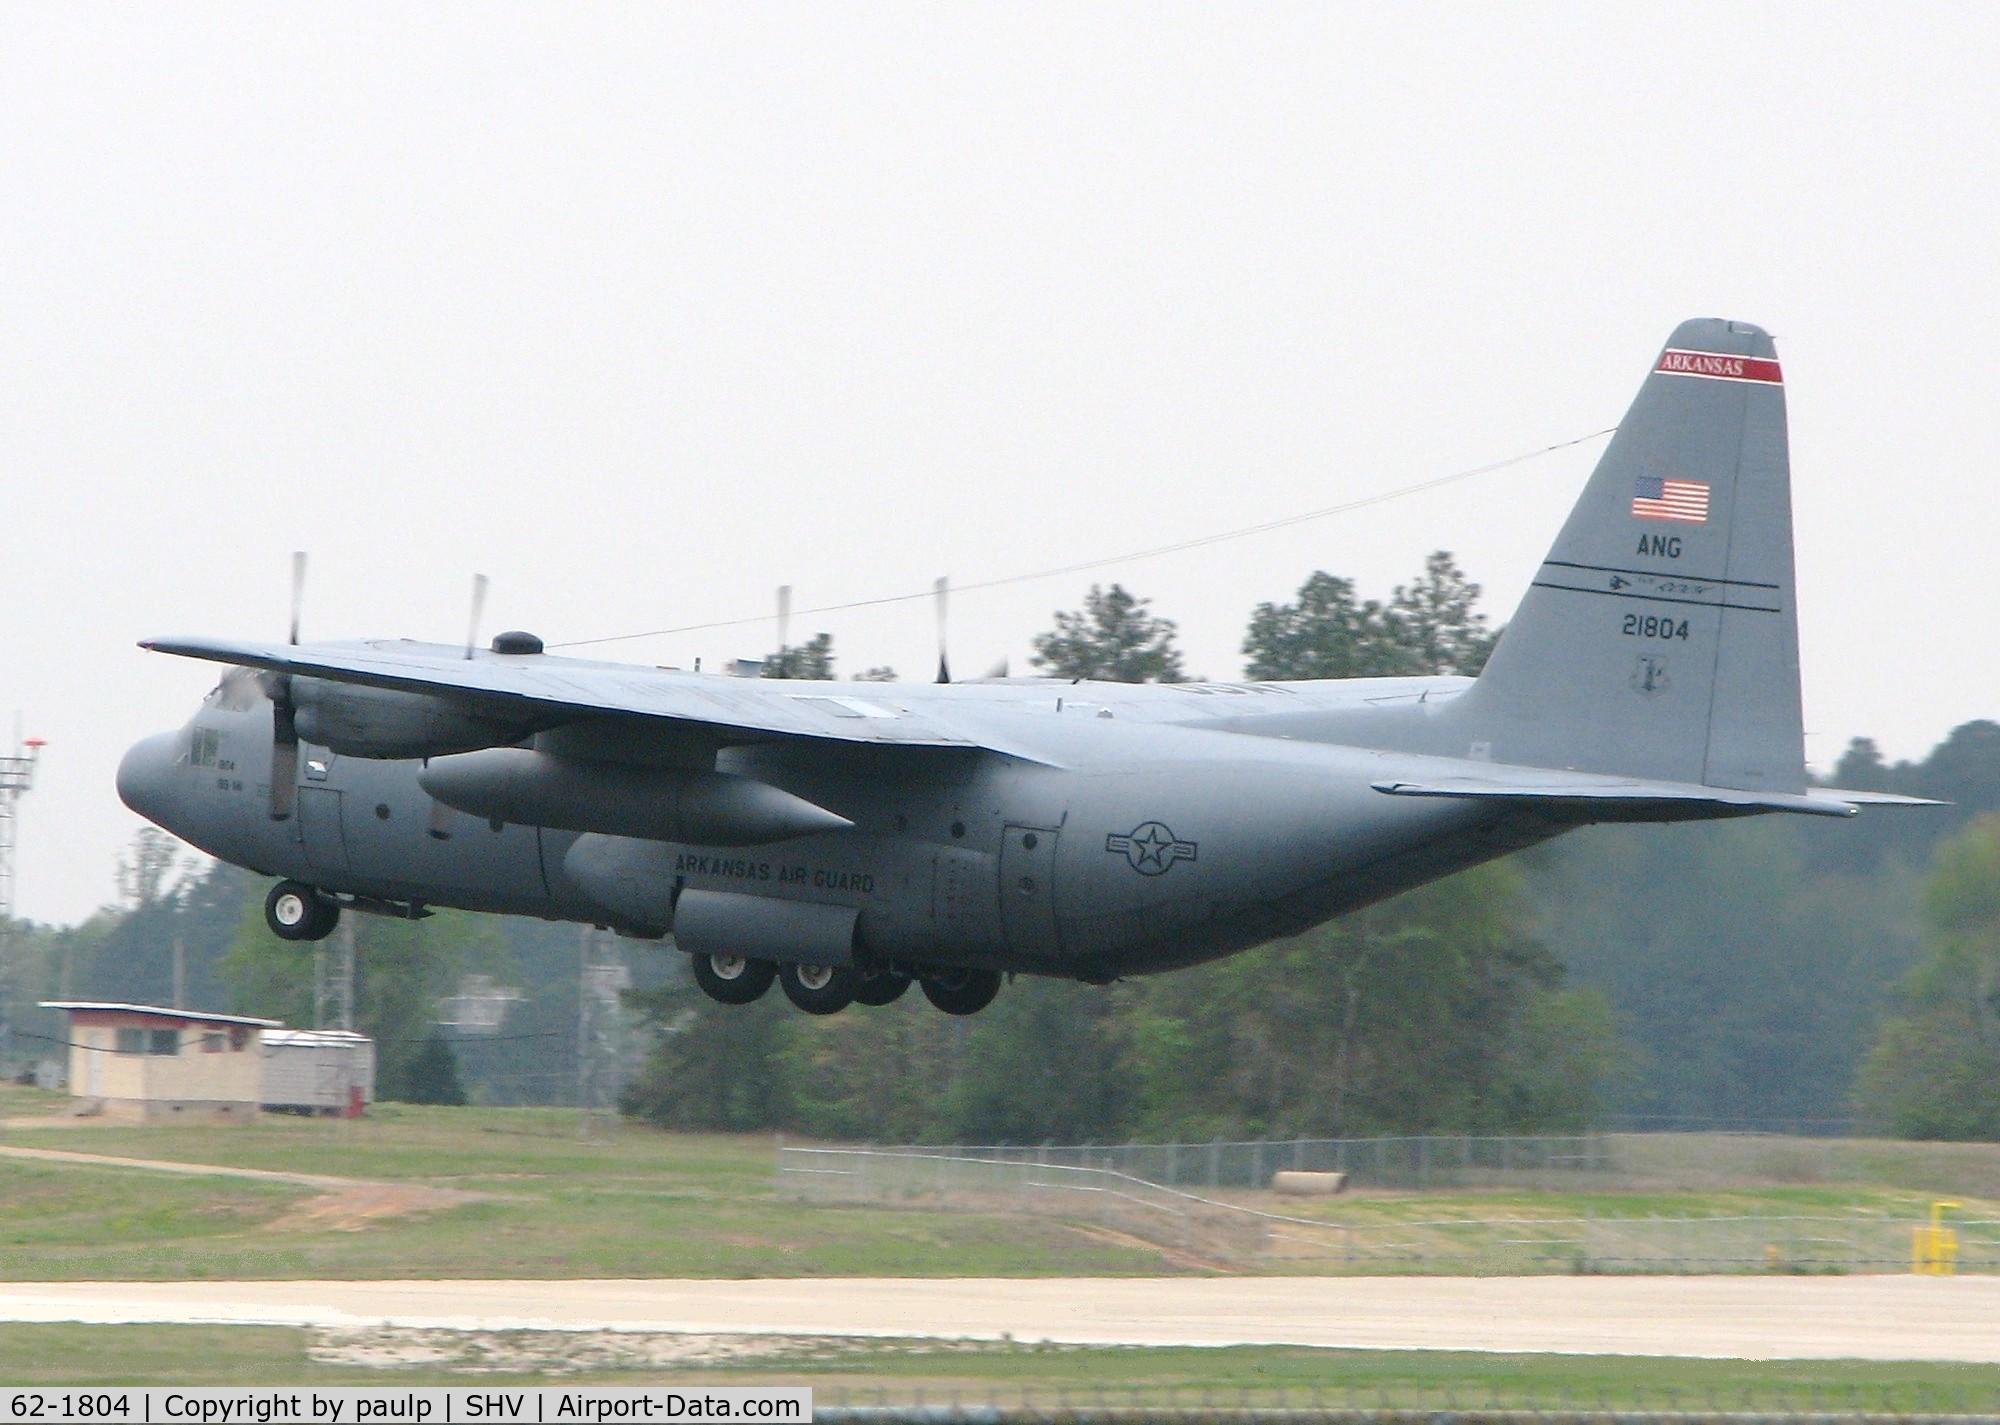 62-1804, 1962 Lockheed C-130E Hercules C/N 382-3758, Arkansas Air Guard doing touch and goes at the Shreveport Regional airport.